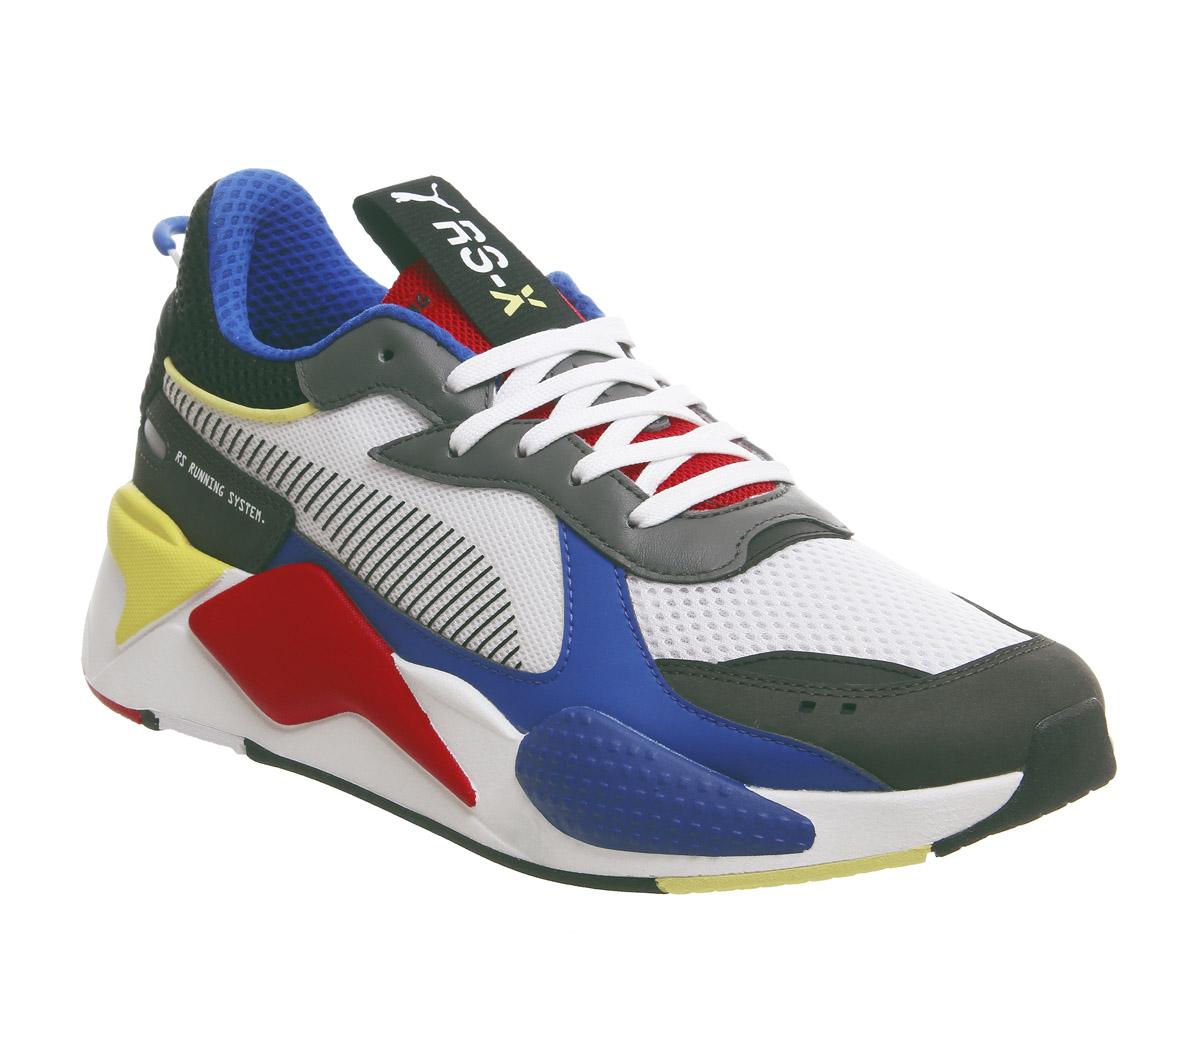 Puma Rs X Toys Trainers Puma White Royal High Risk Red His Trainers